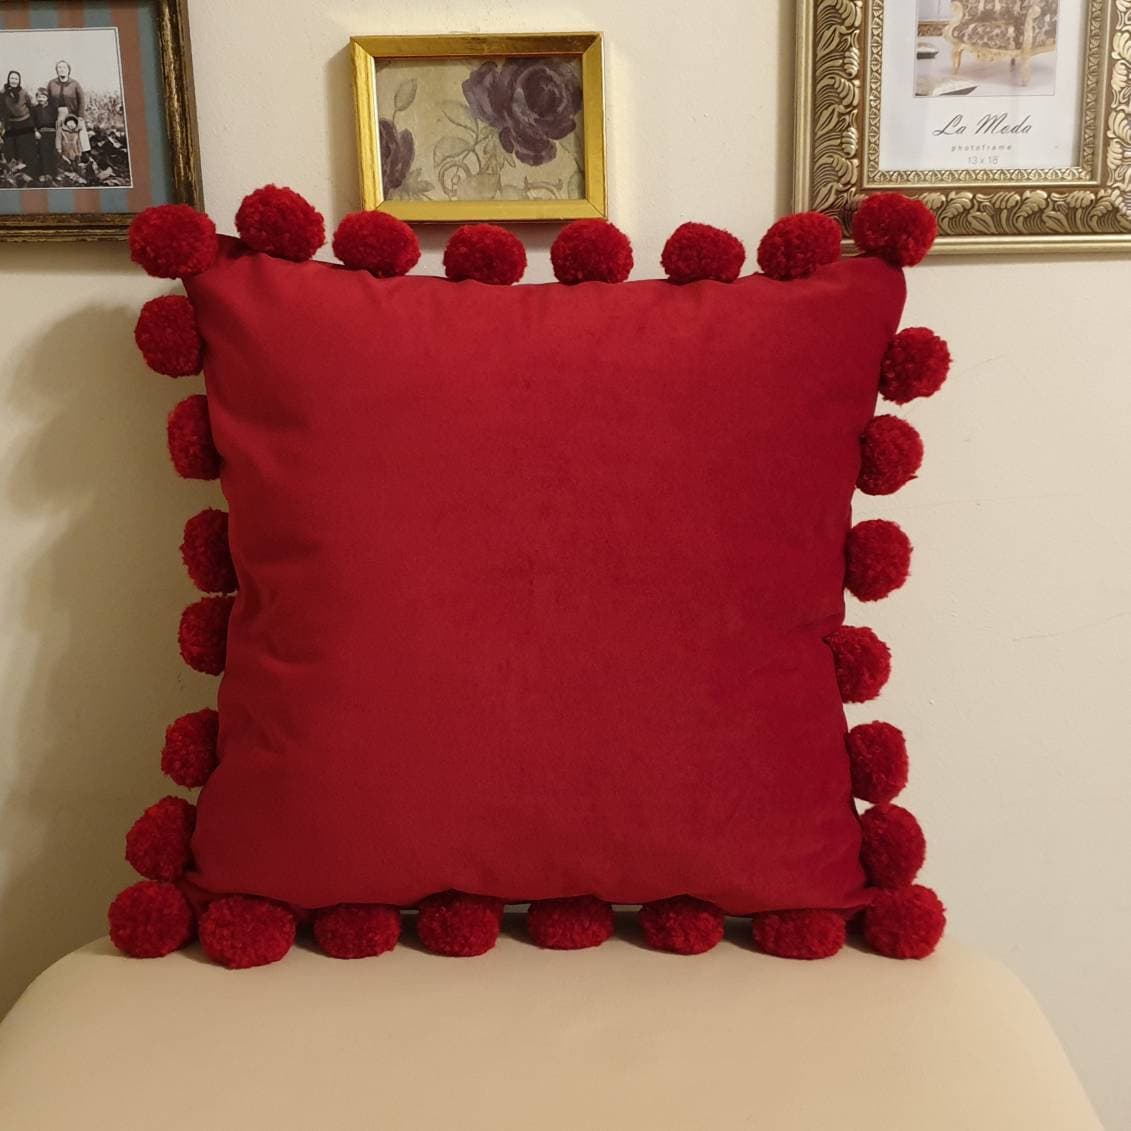 Furnace Ark kompensere Red Pillow Cover With Pom Poms Red Pom Pom Pillow Case Red | Etsy